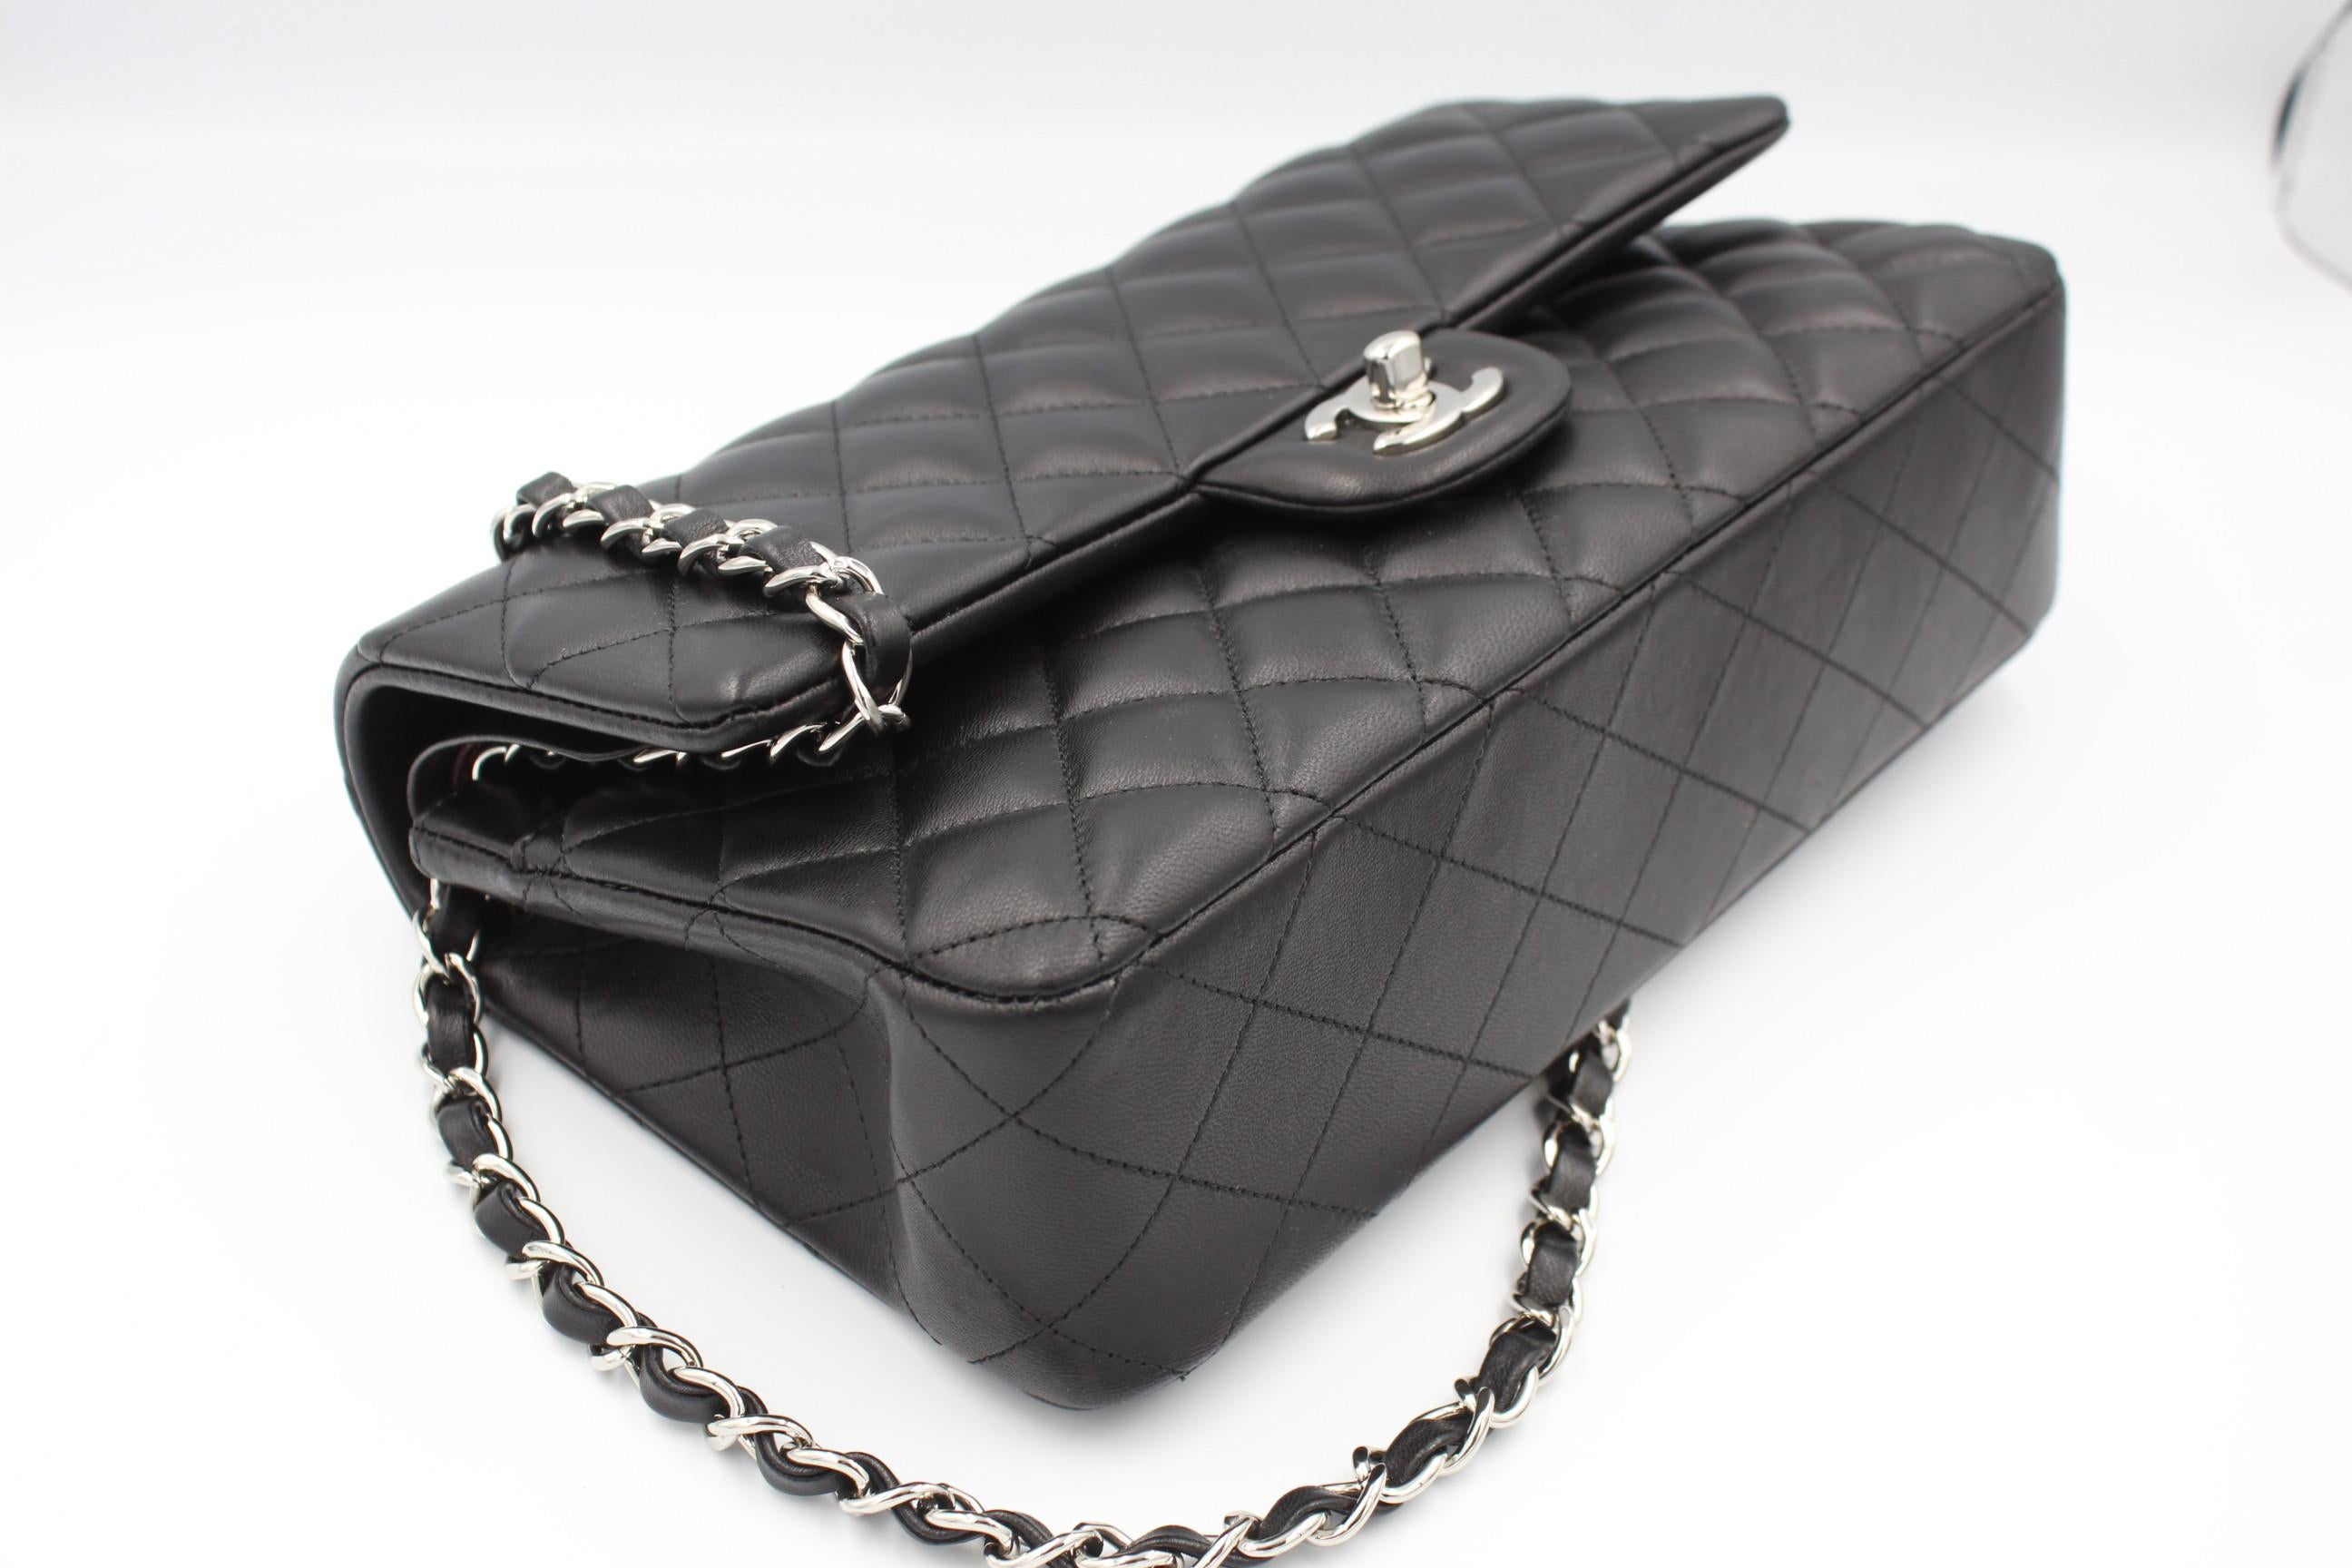 Women's Chanel Timeless Bag in Black Lambskin Leather and Silver Hardware